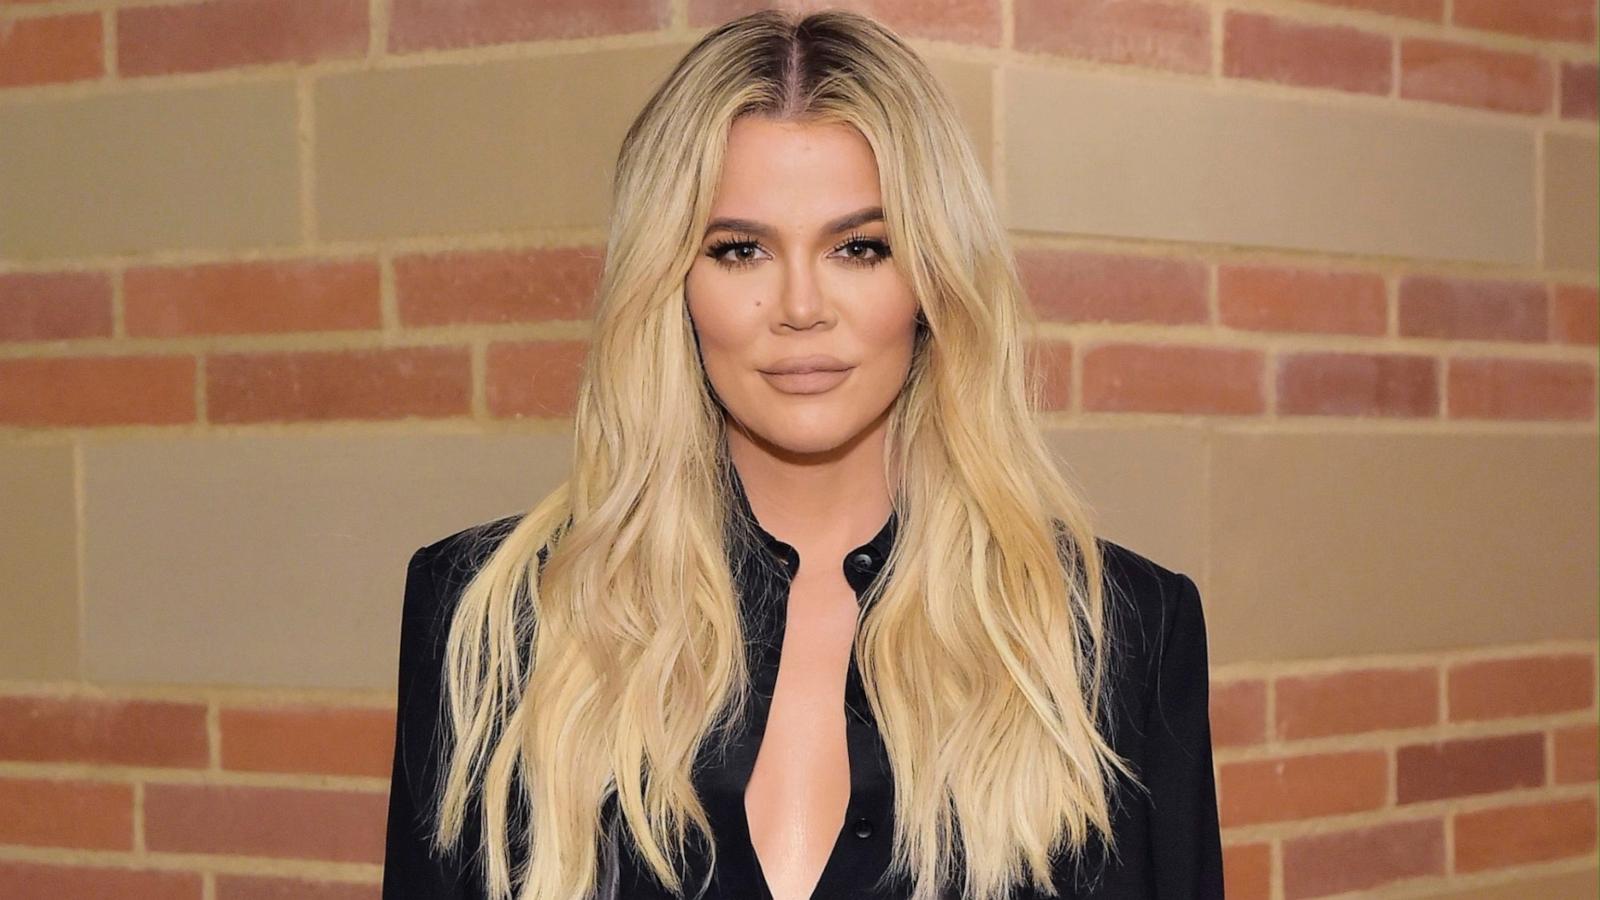 PHOTO: Khloe Kardashian attends The Promise Armenian Institute Event At UCLA at Royce Hall on November 19, 2019 in Los Angeles, California.